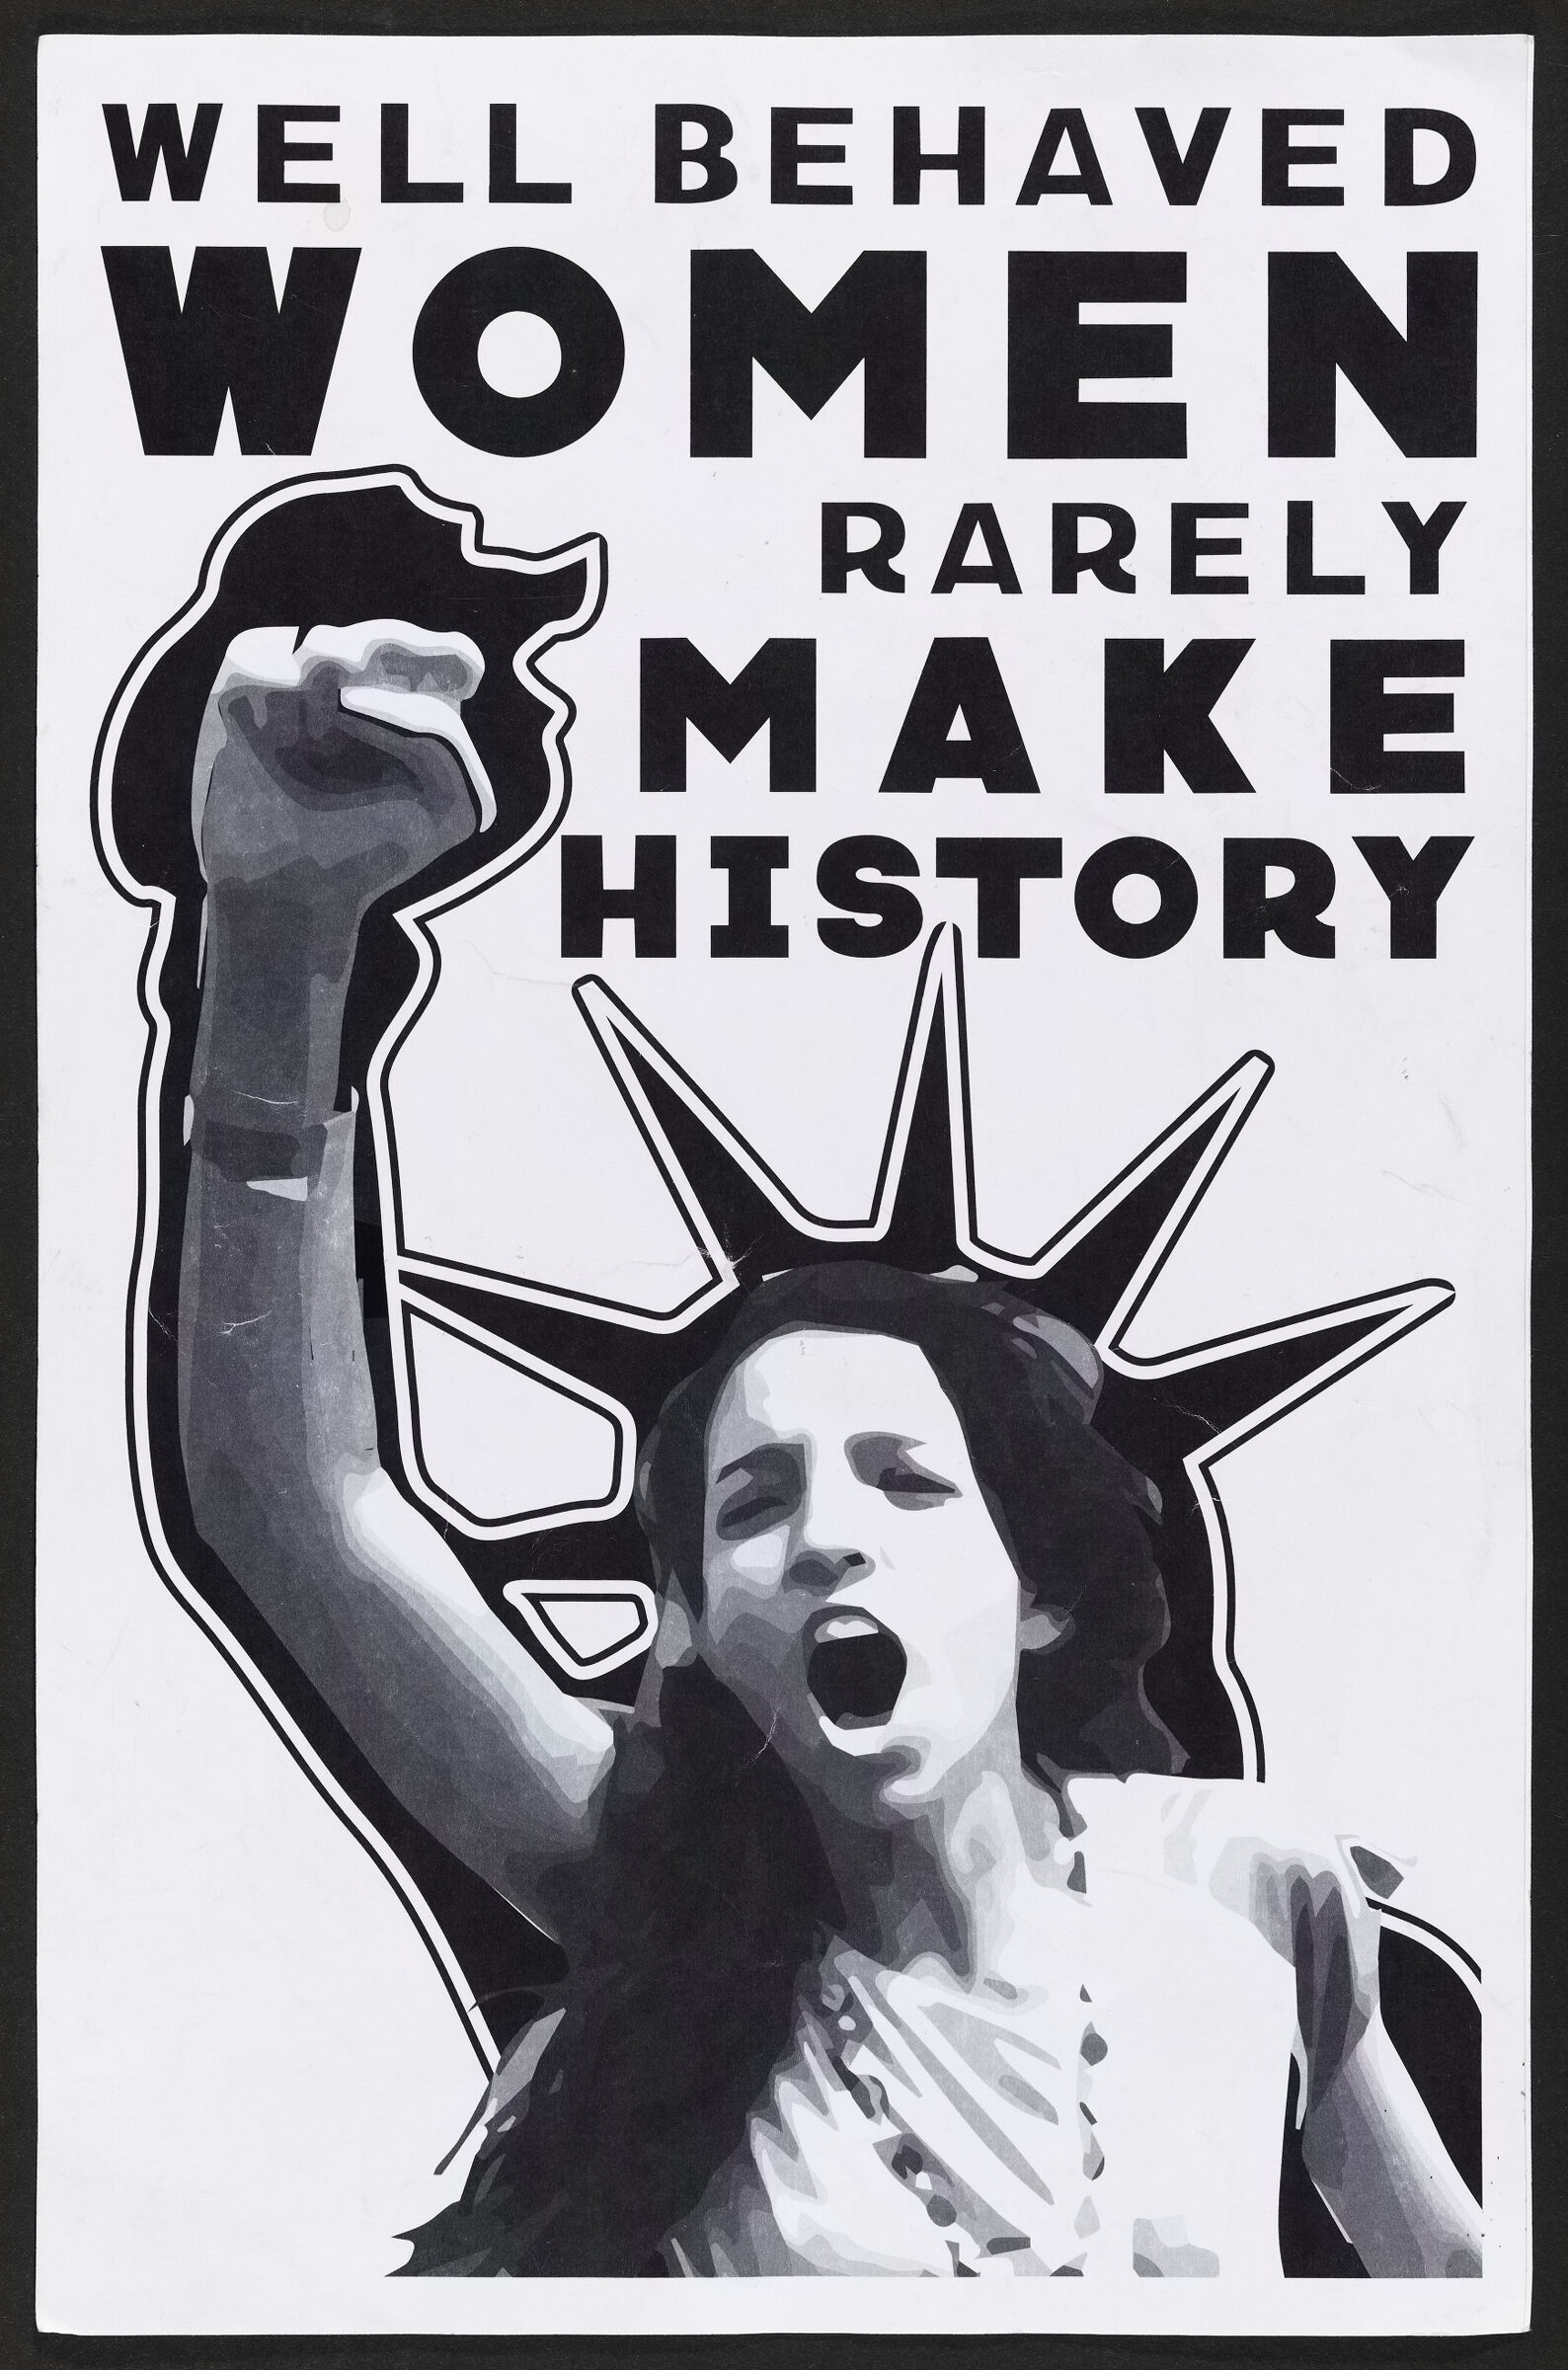 Poster from the Women's March reading "Well behaved women rarely make history"